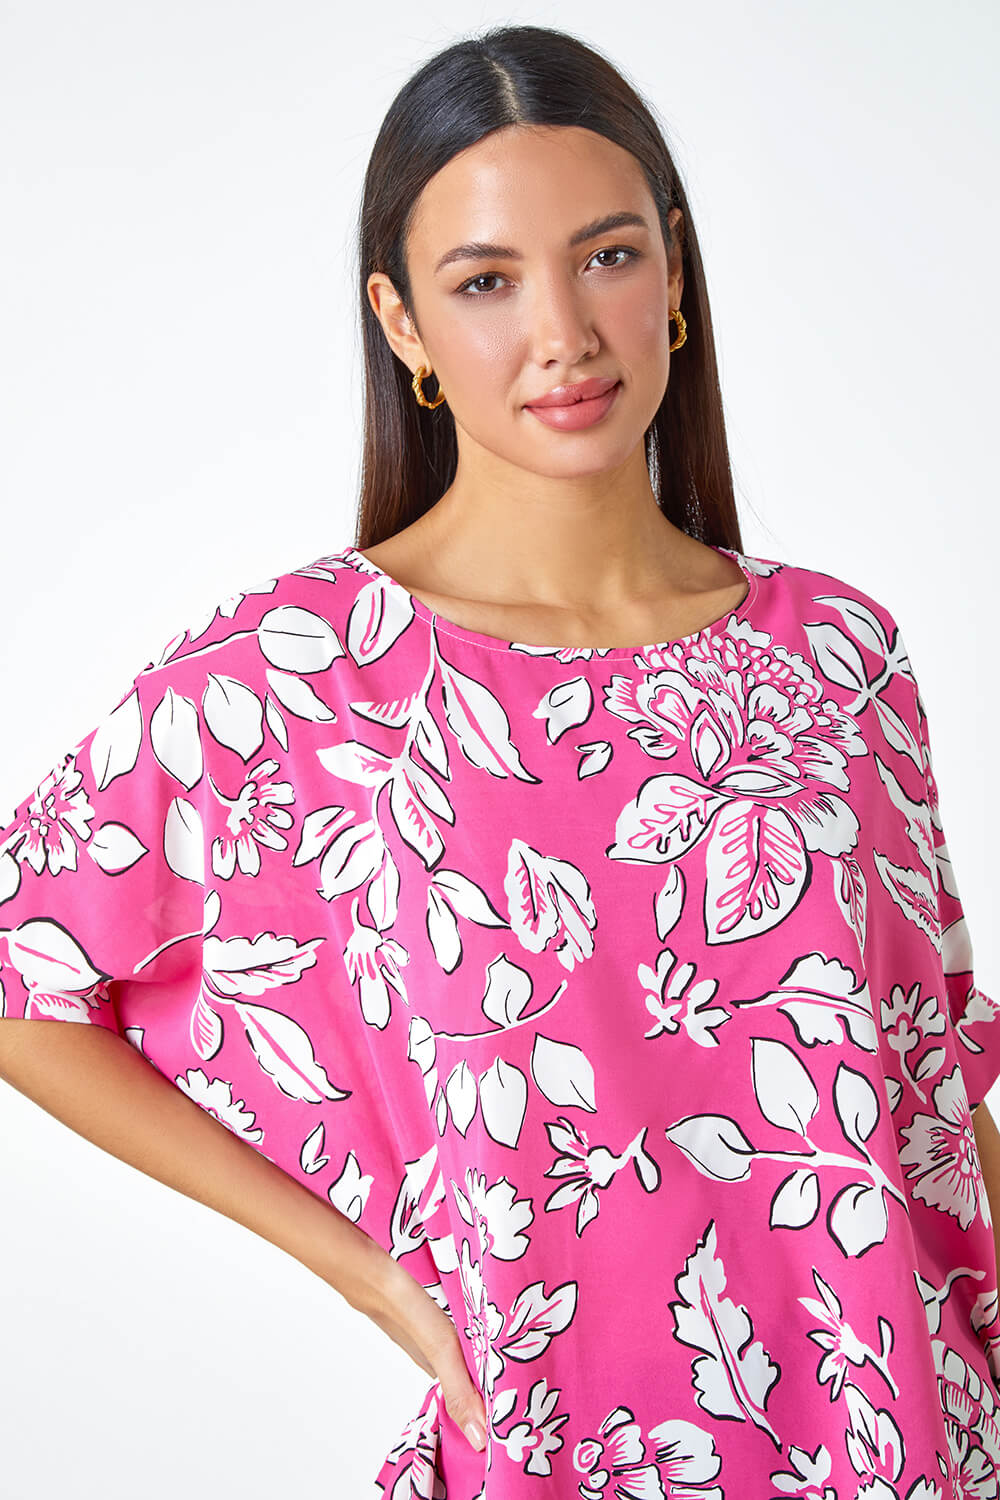 PINK Floral Print Button Back Top, Image 4 of 5